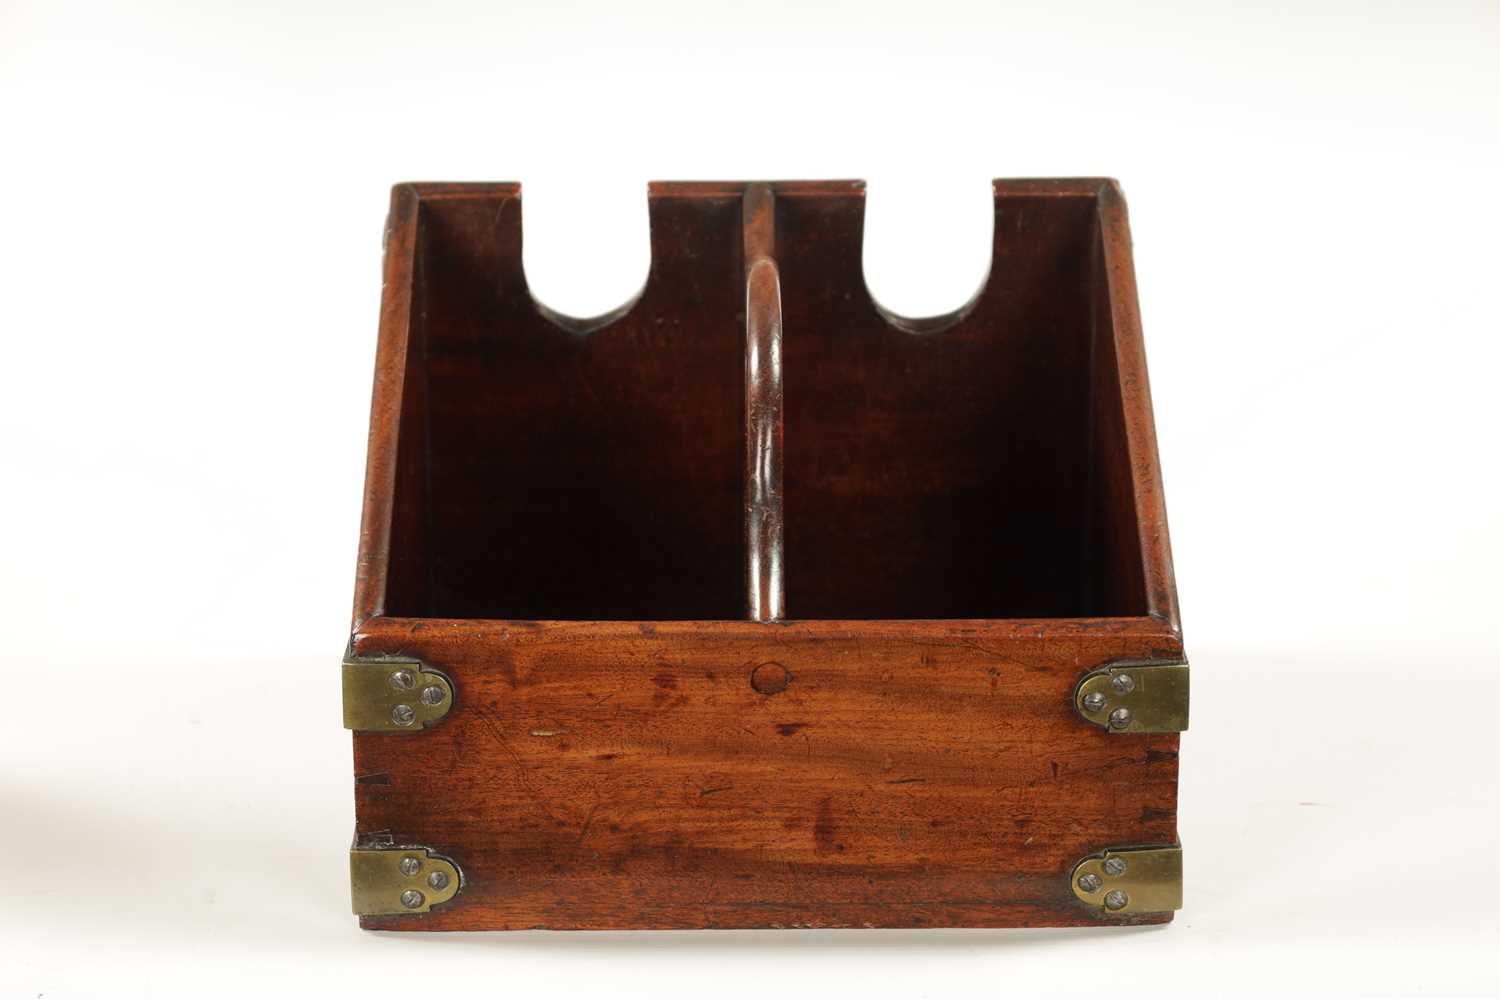 A GEORGE III BOUND MAHOGANY DOUBLE WINE BOTTLE CARRIER - Image 4 of 6